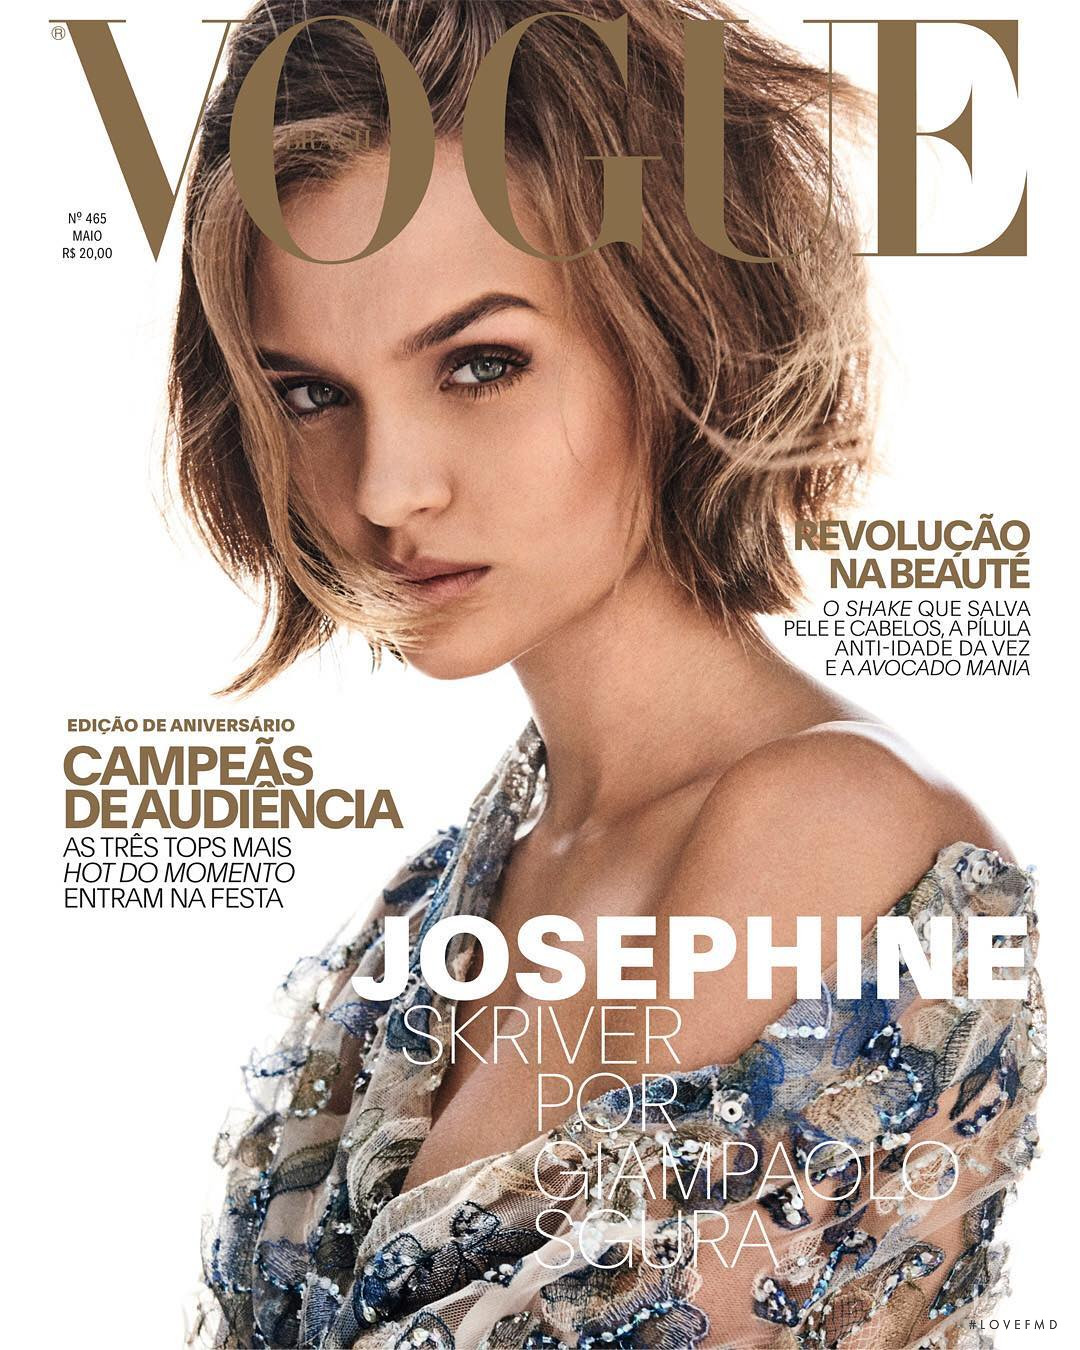 Cover of Vogue Brazil with Josephine Skriver, May 2017 (ID:56243 ...